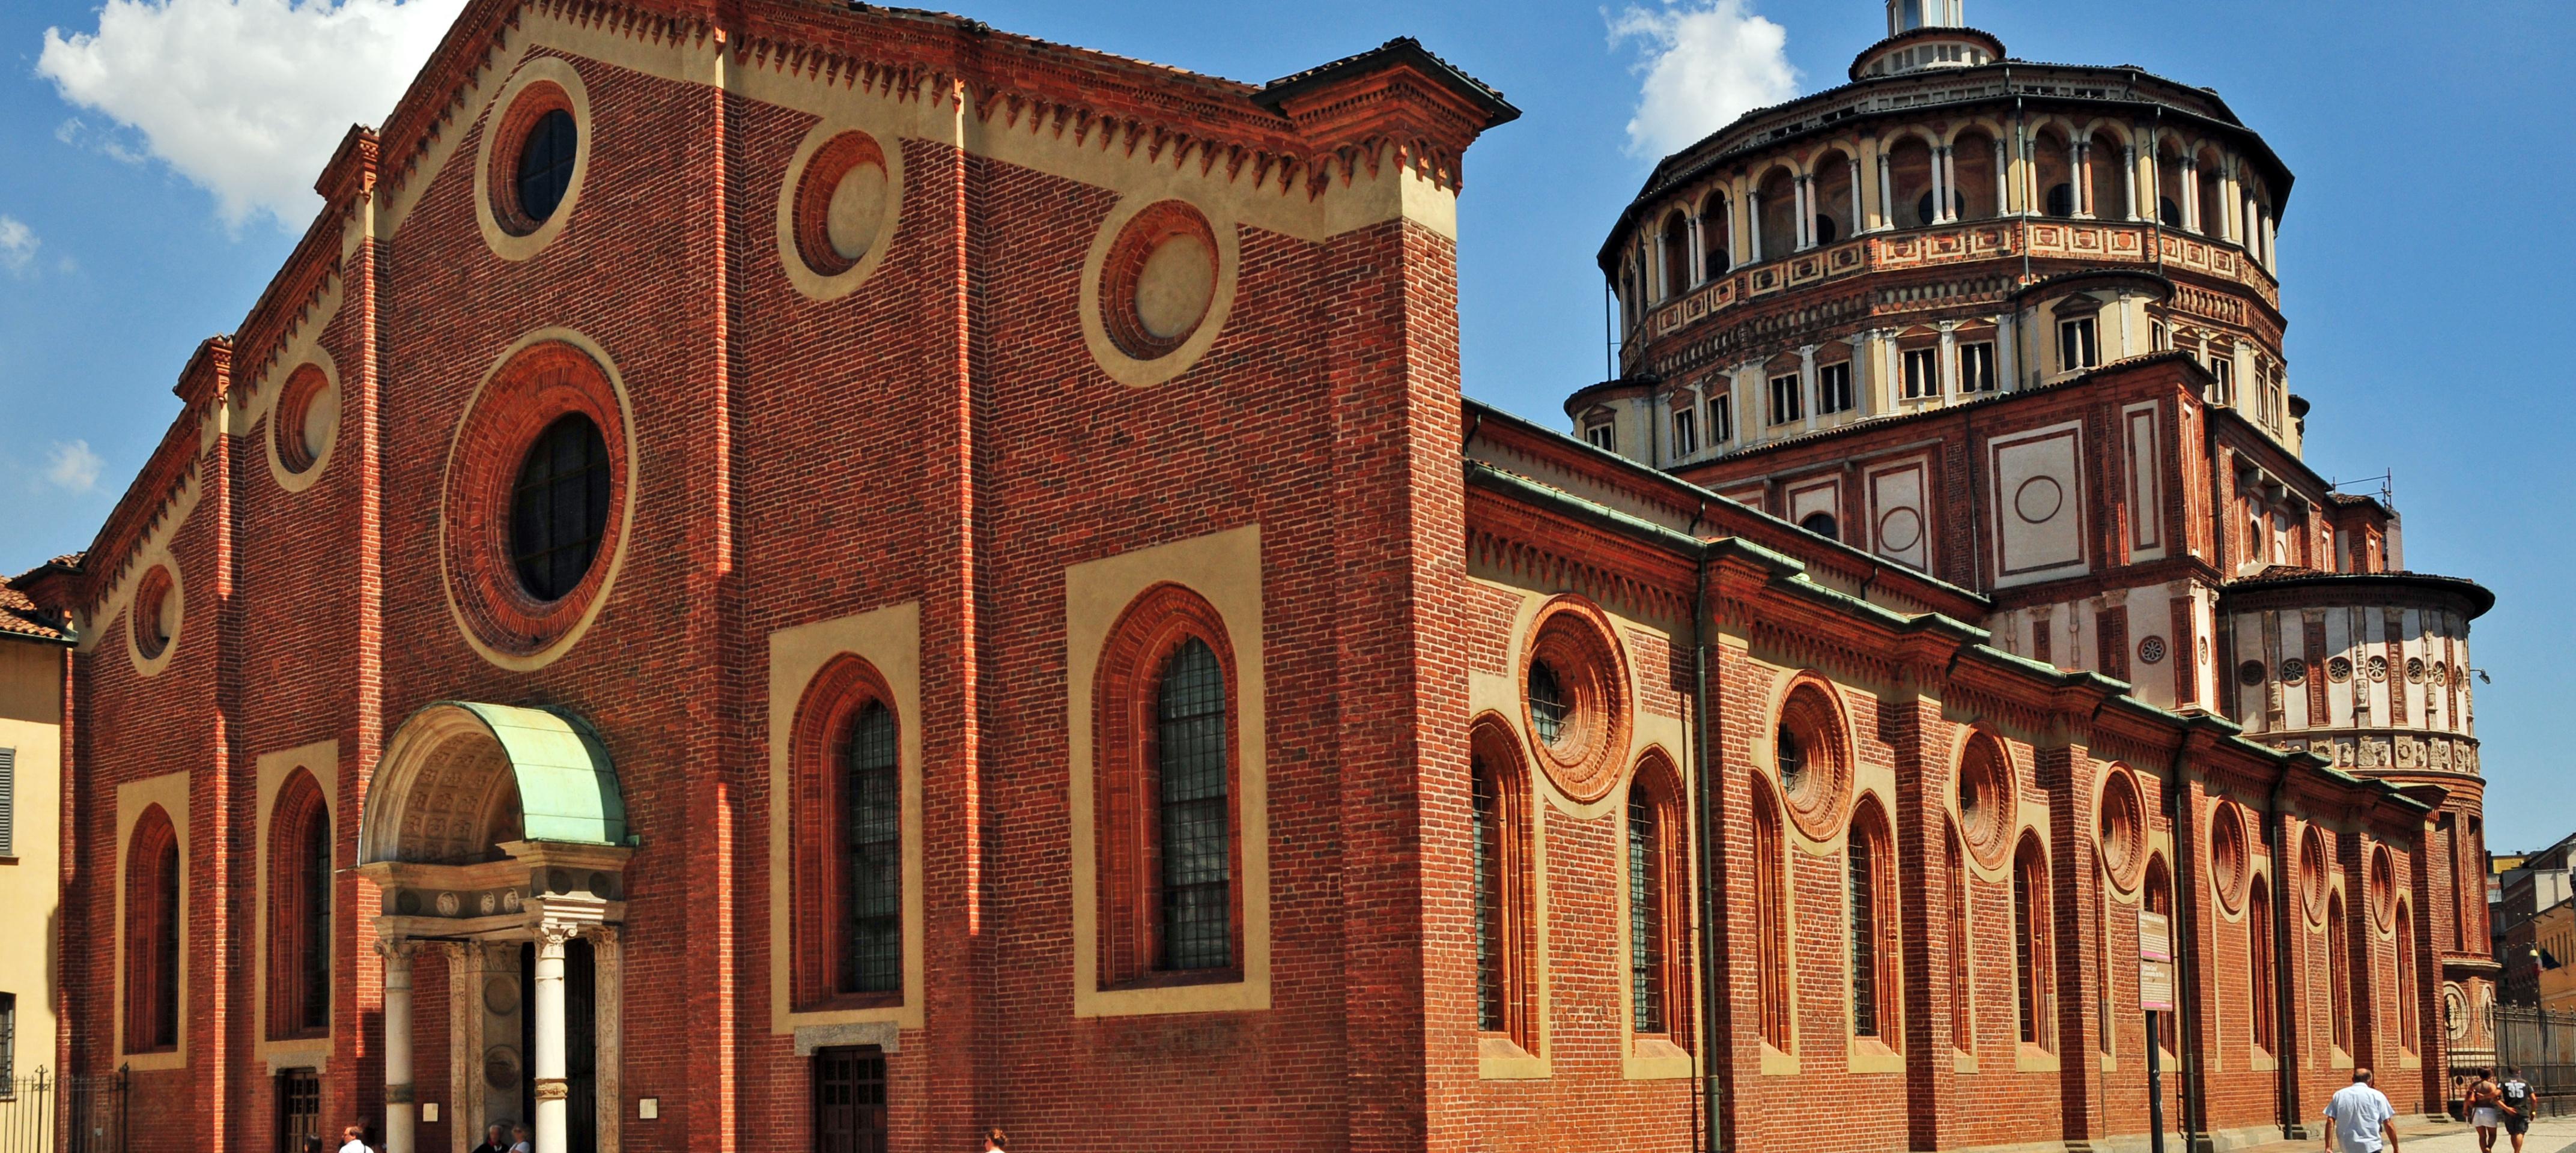 Walking Tour of Milan (morning) – Skip-the-line tickets for "The Last Supper"